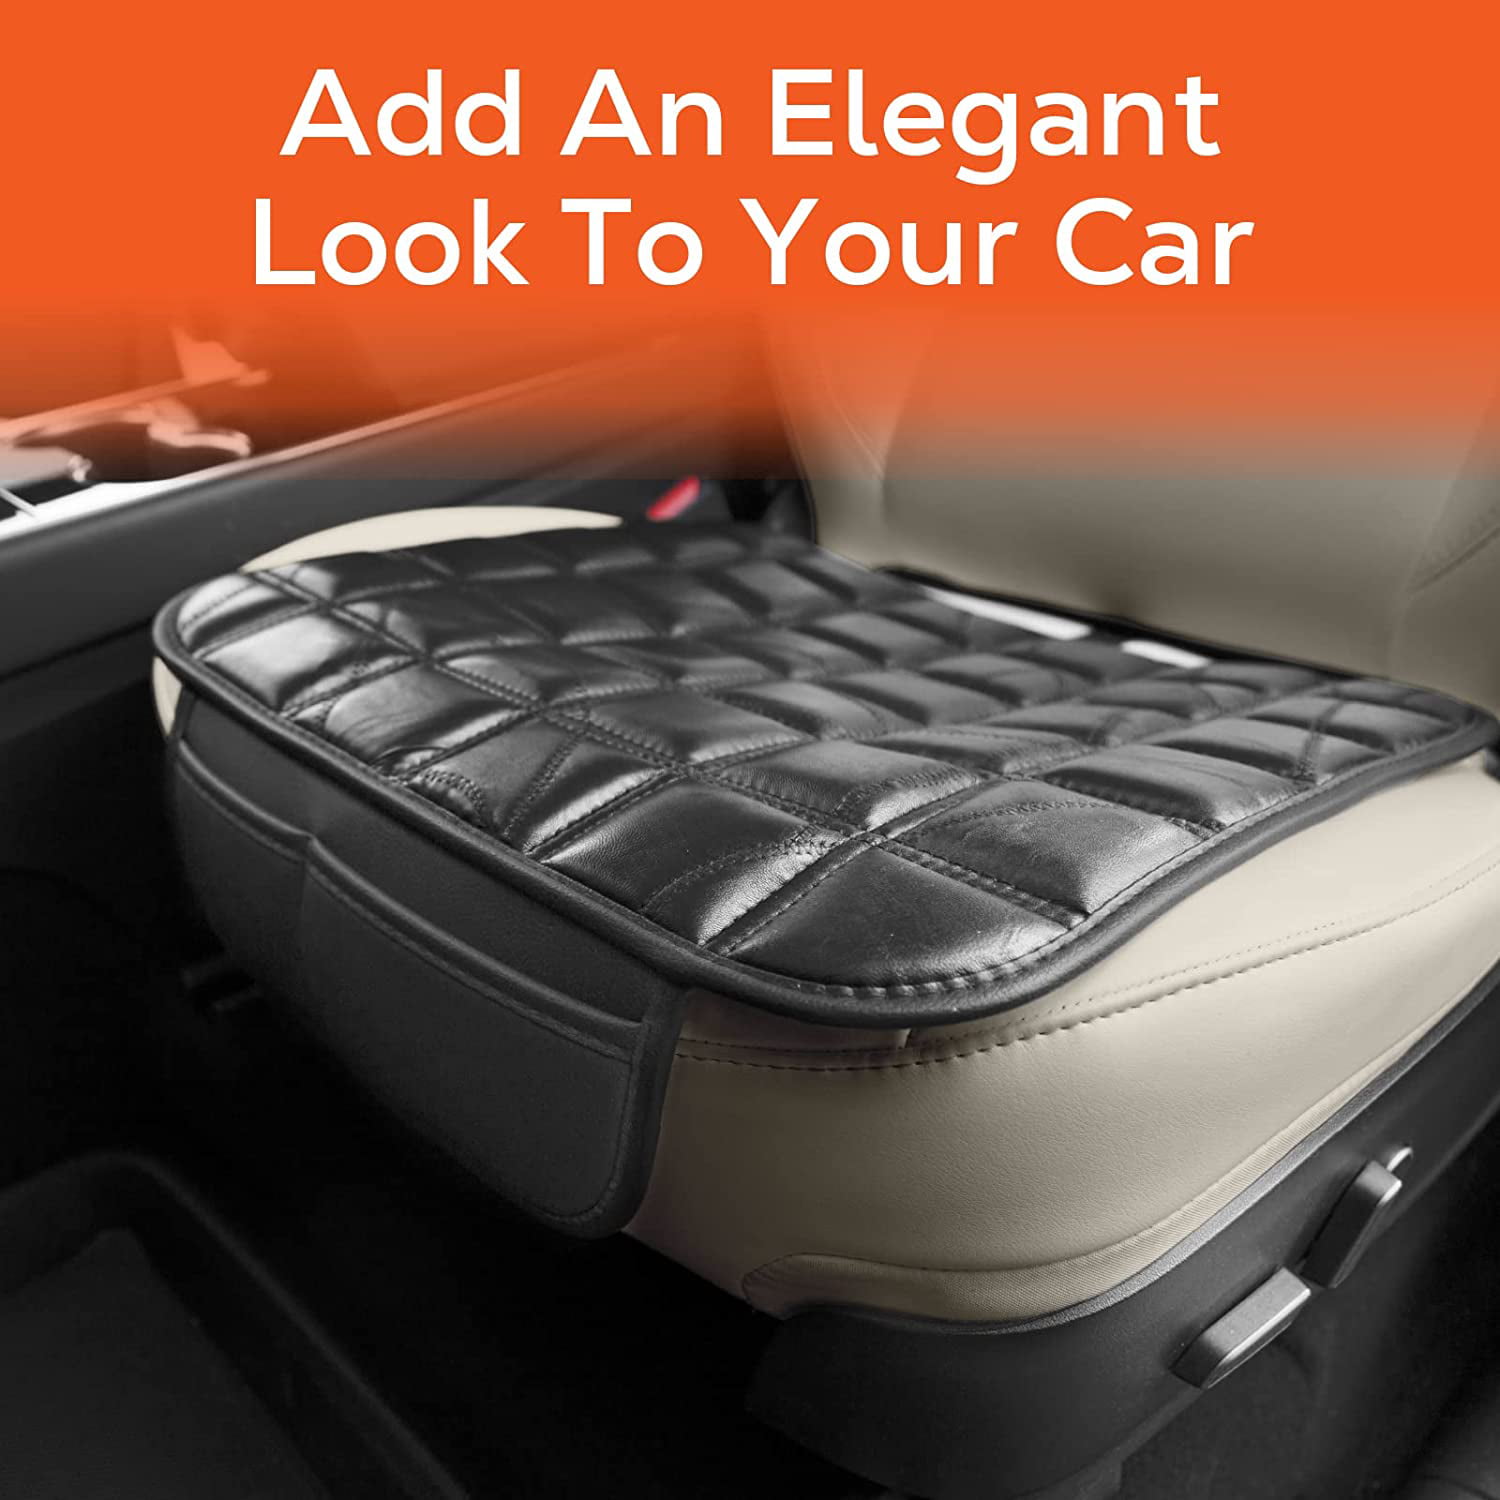 Top 10 car seat cushion ideas and inspiration